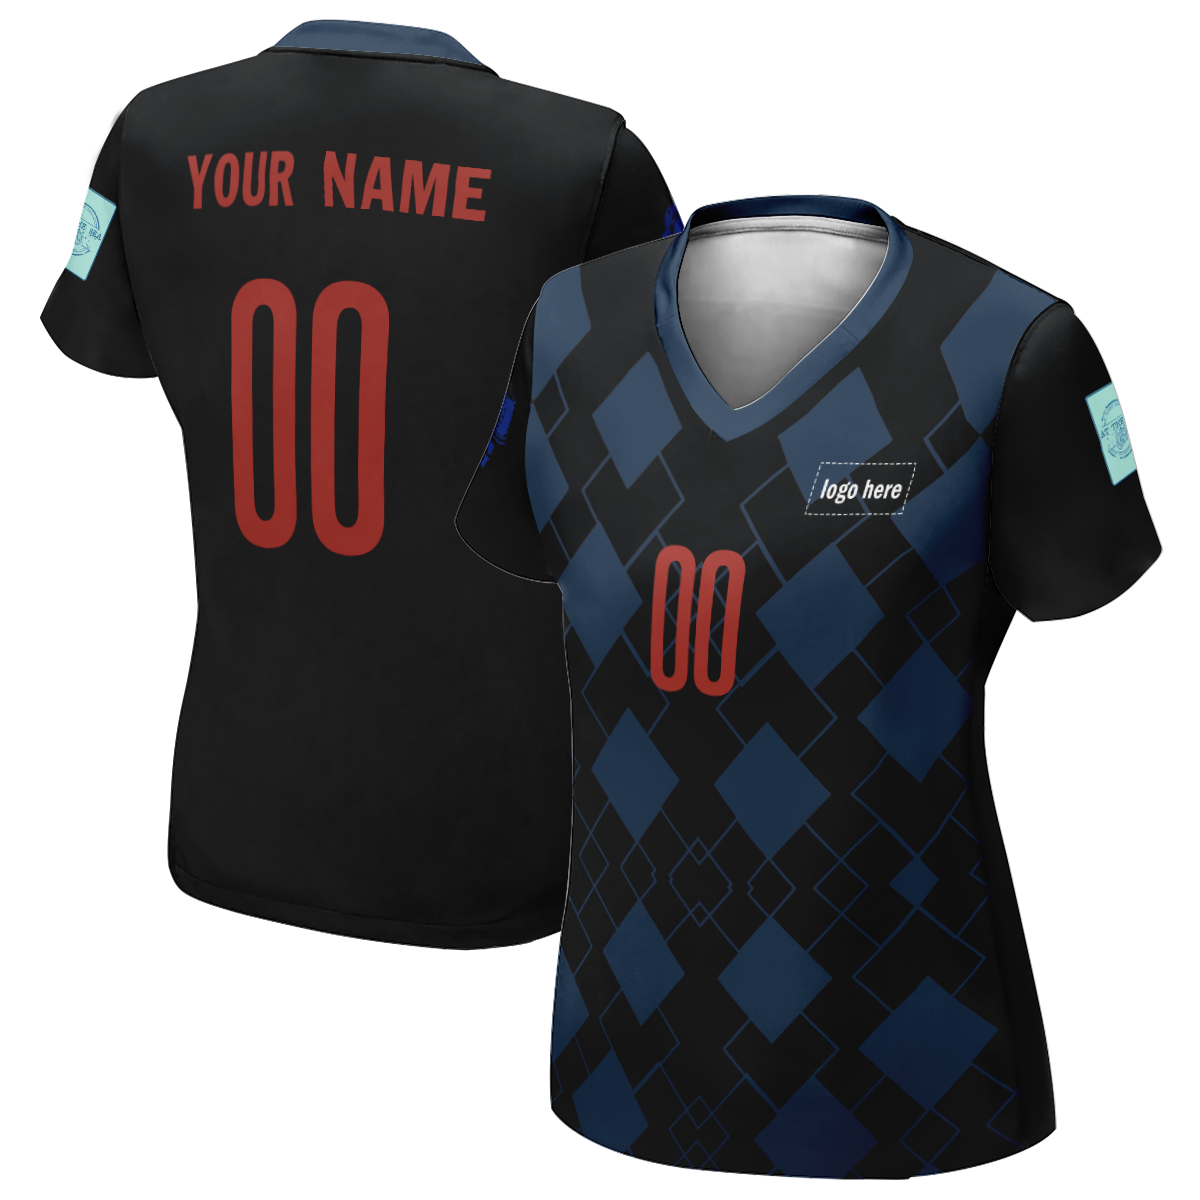 Women's Printed Croatia World Cup Custom Soccer Jersey With Name